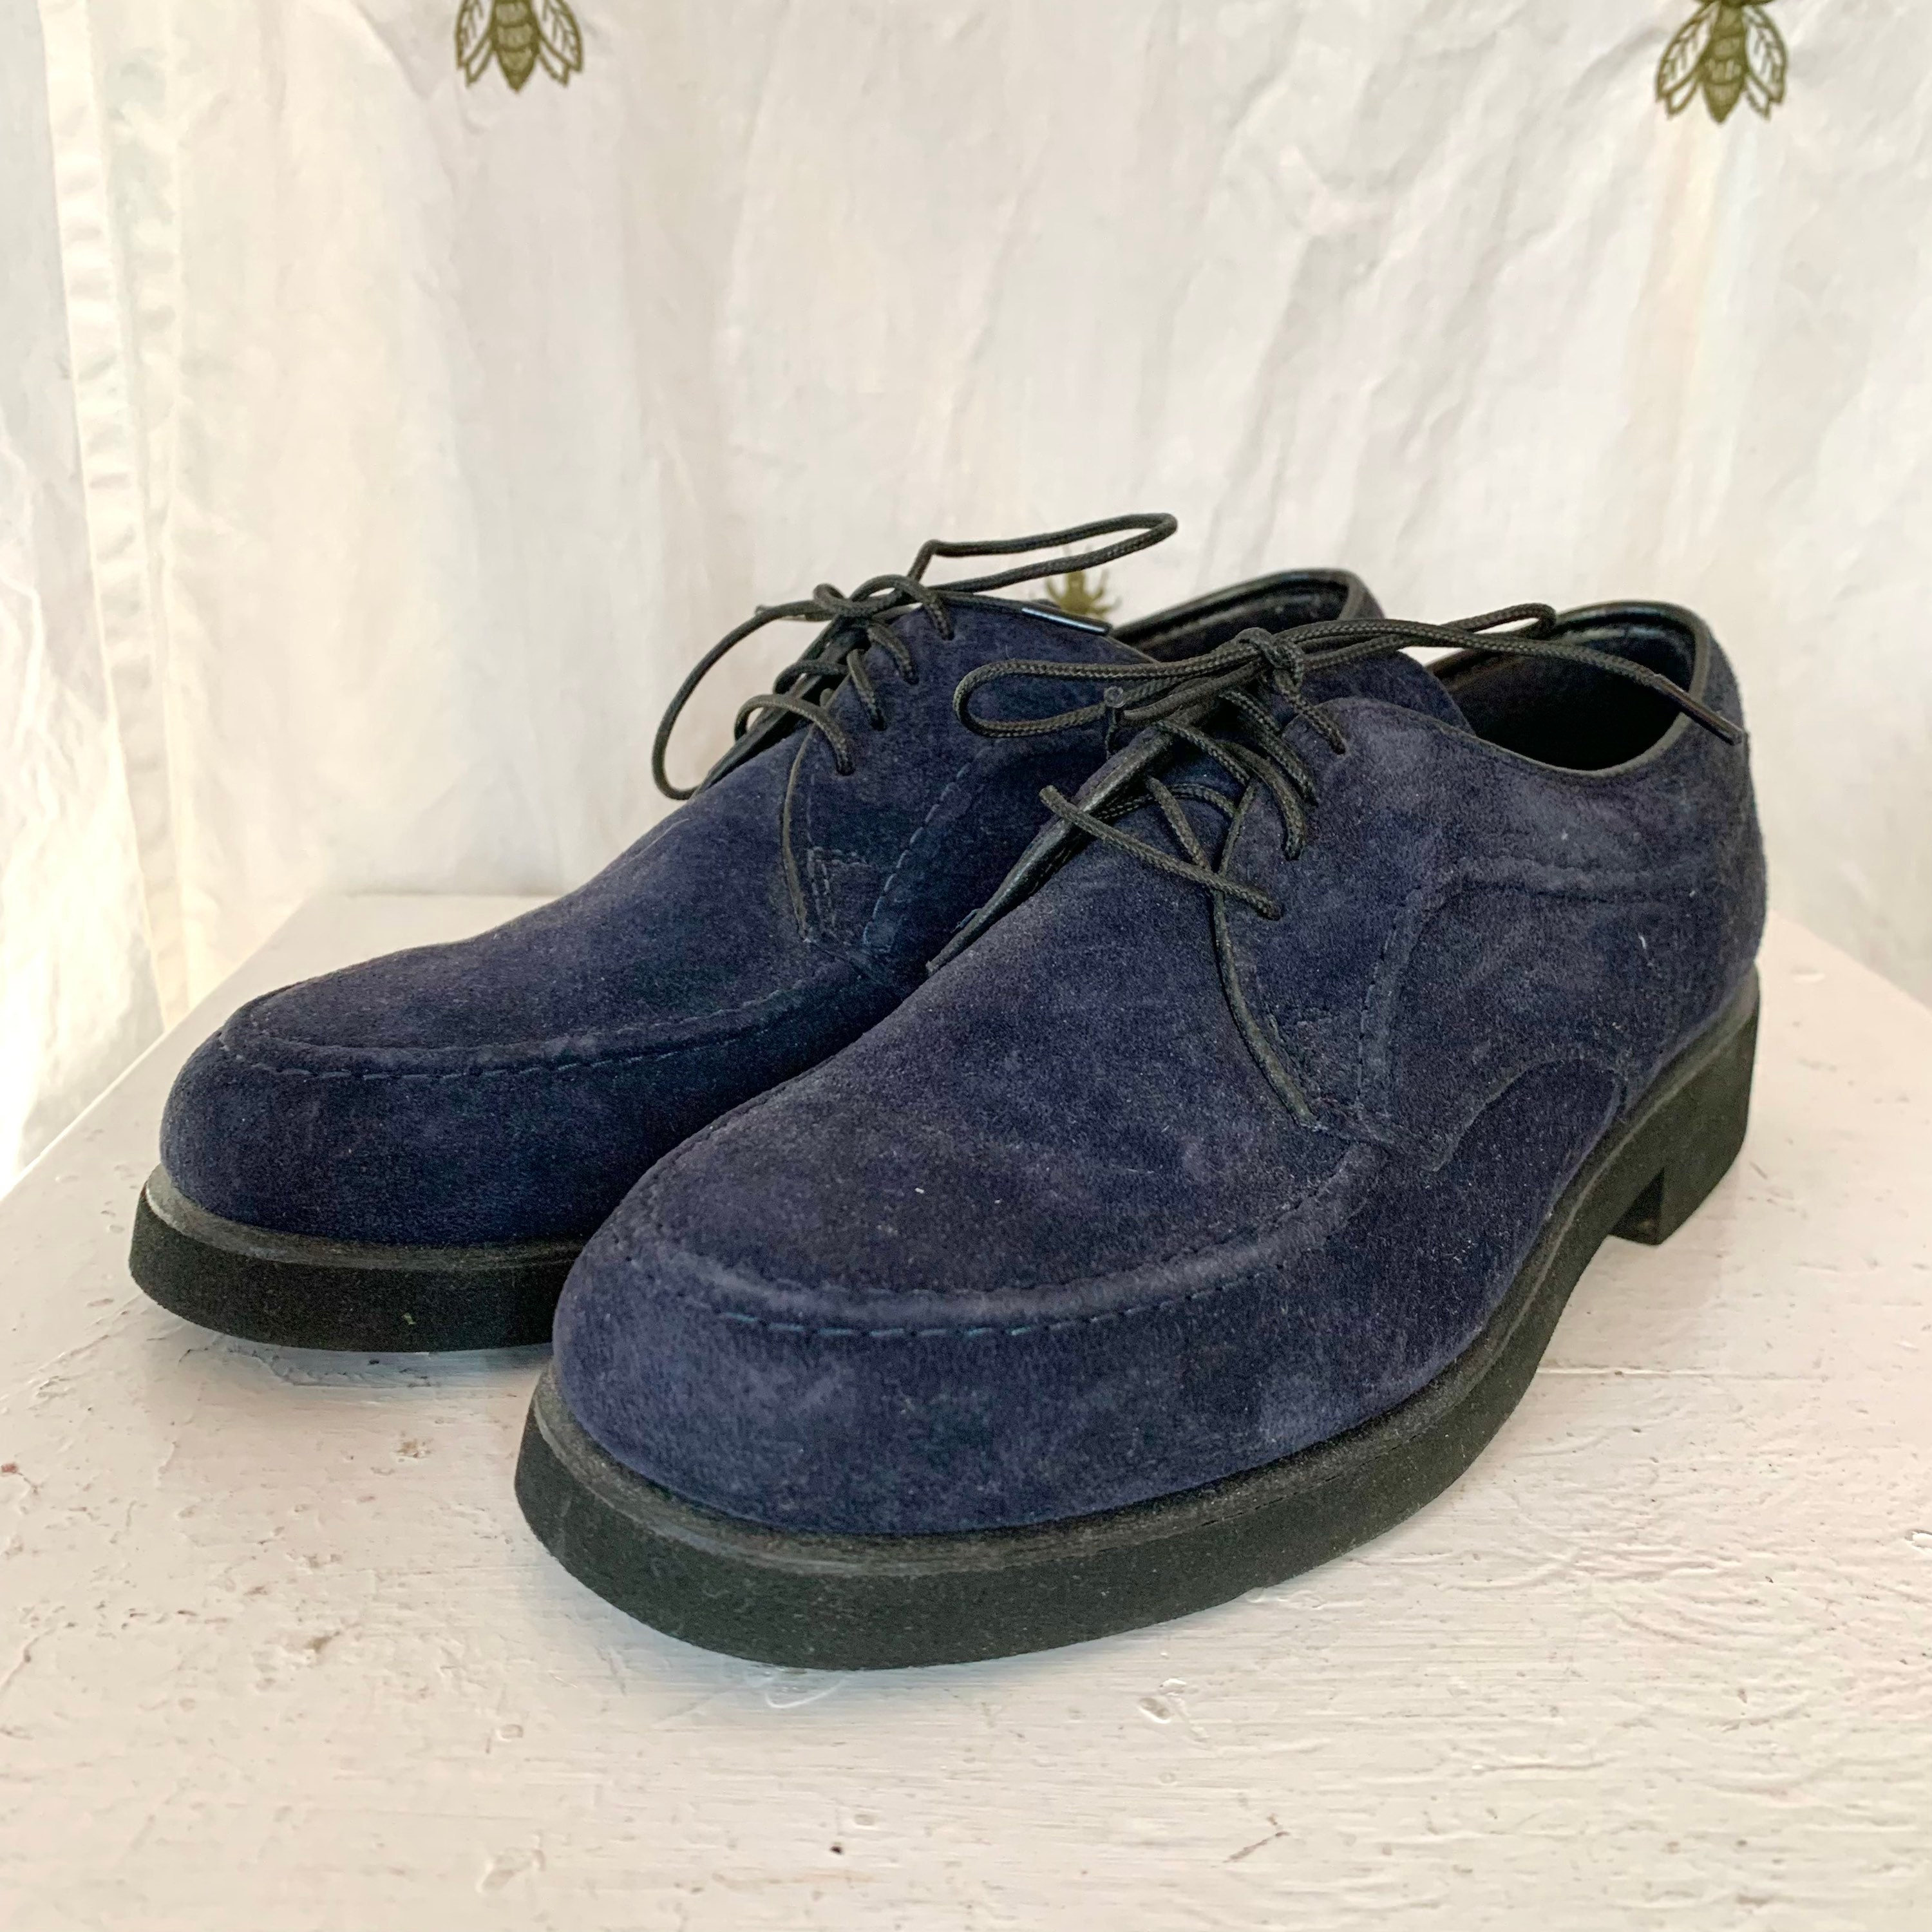 Size 1/2 Vintage Hush Puppies Blue Suede Leather Oxford - Etsy Finland